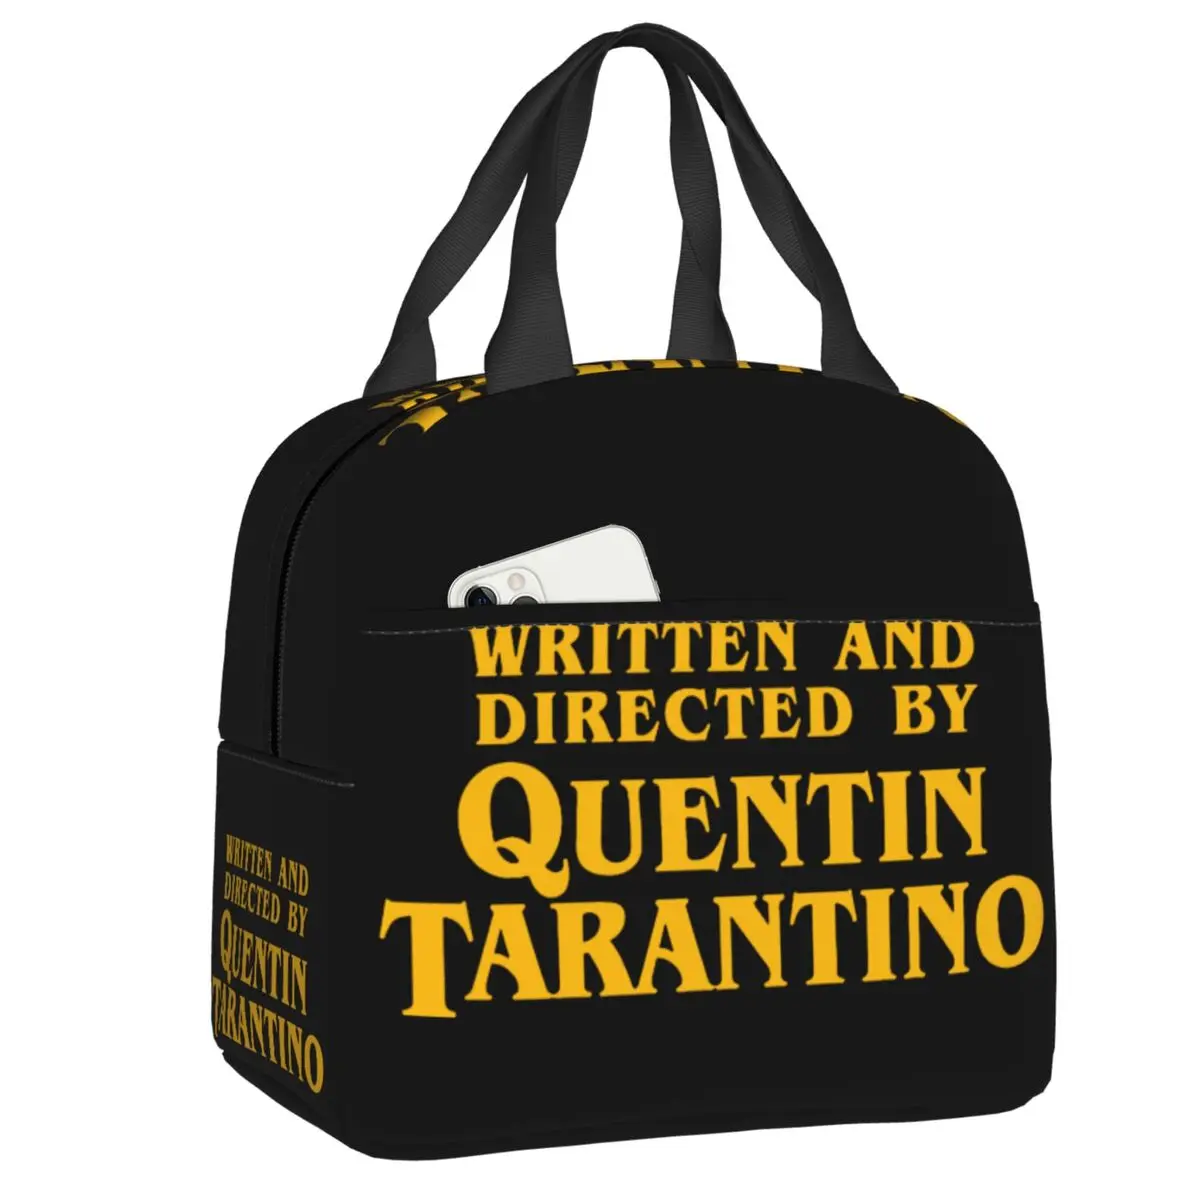 

Quentin Tarantino Lunch Bag Portable Thermal Insulated Pulp Fiction Kill Bill Movie Lunch Box for Women Kids School Food Tote